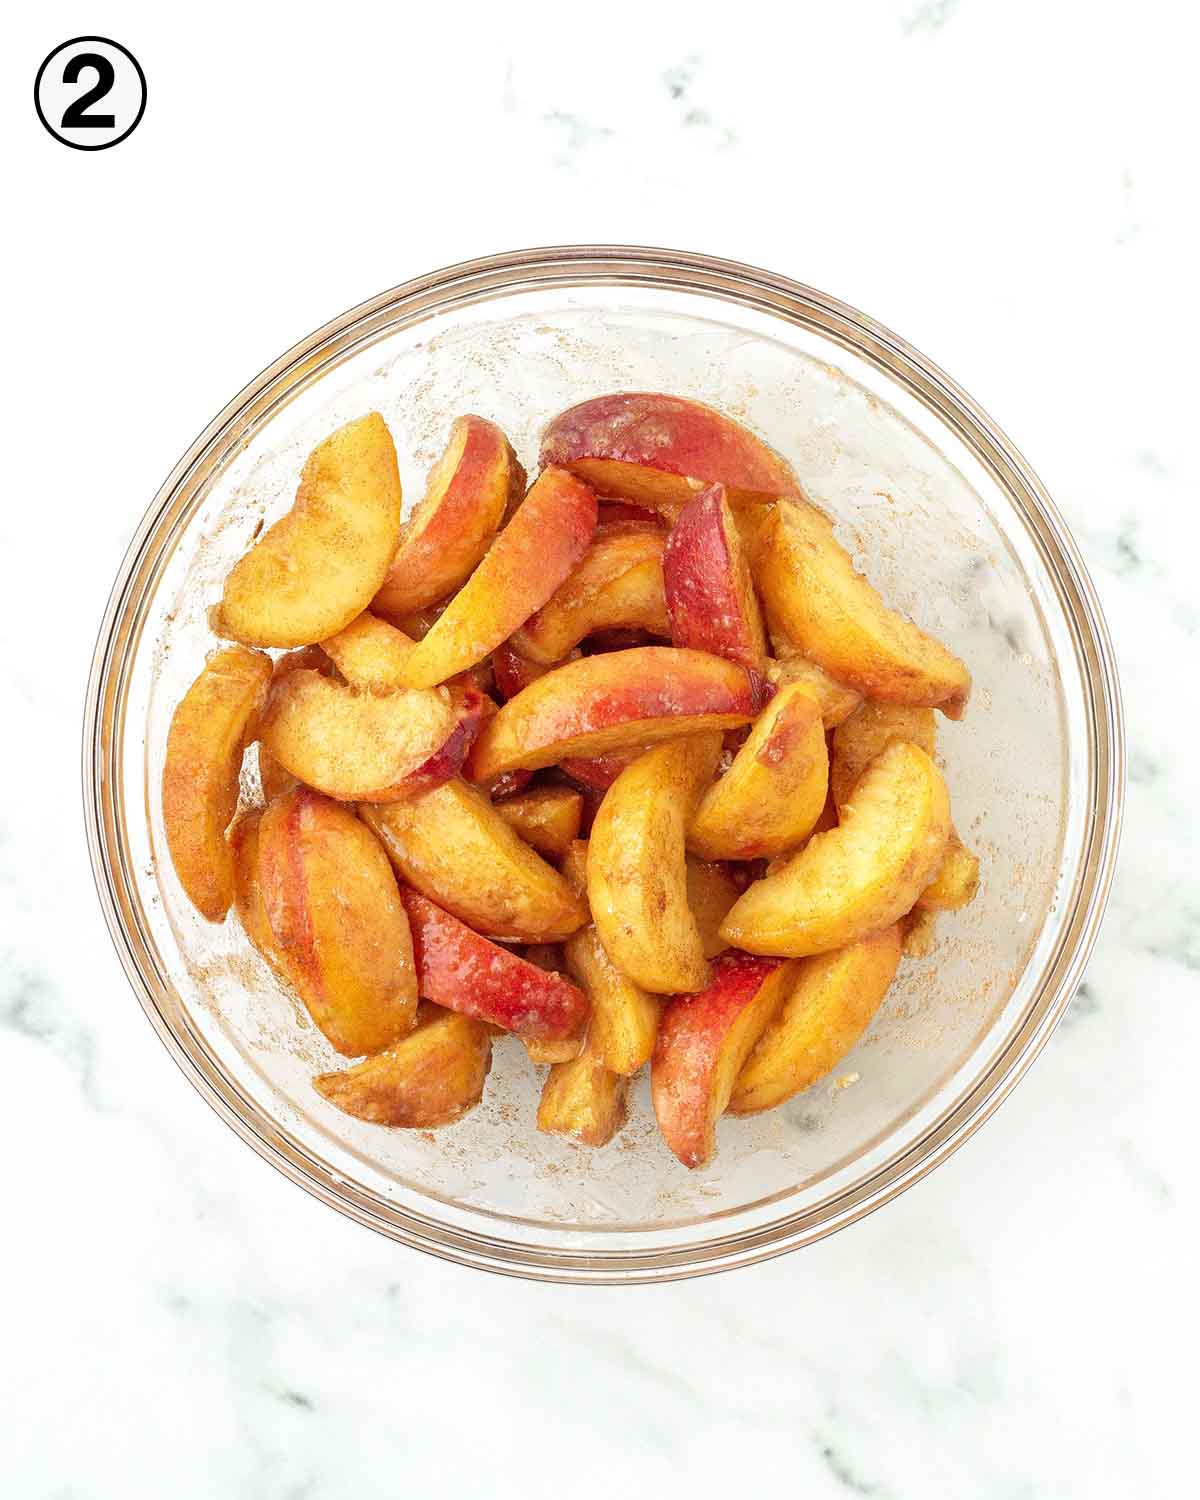 A glass bowl of peach galette filling.